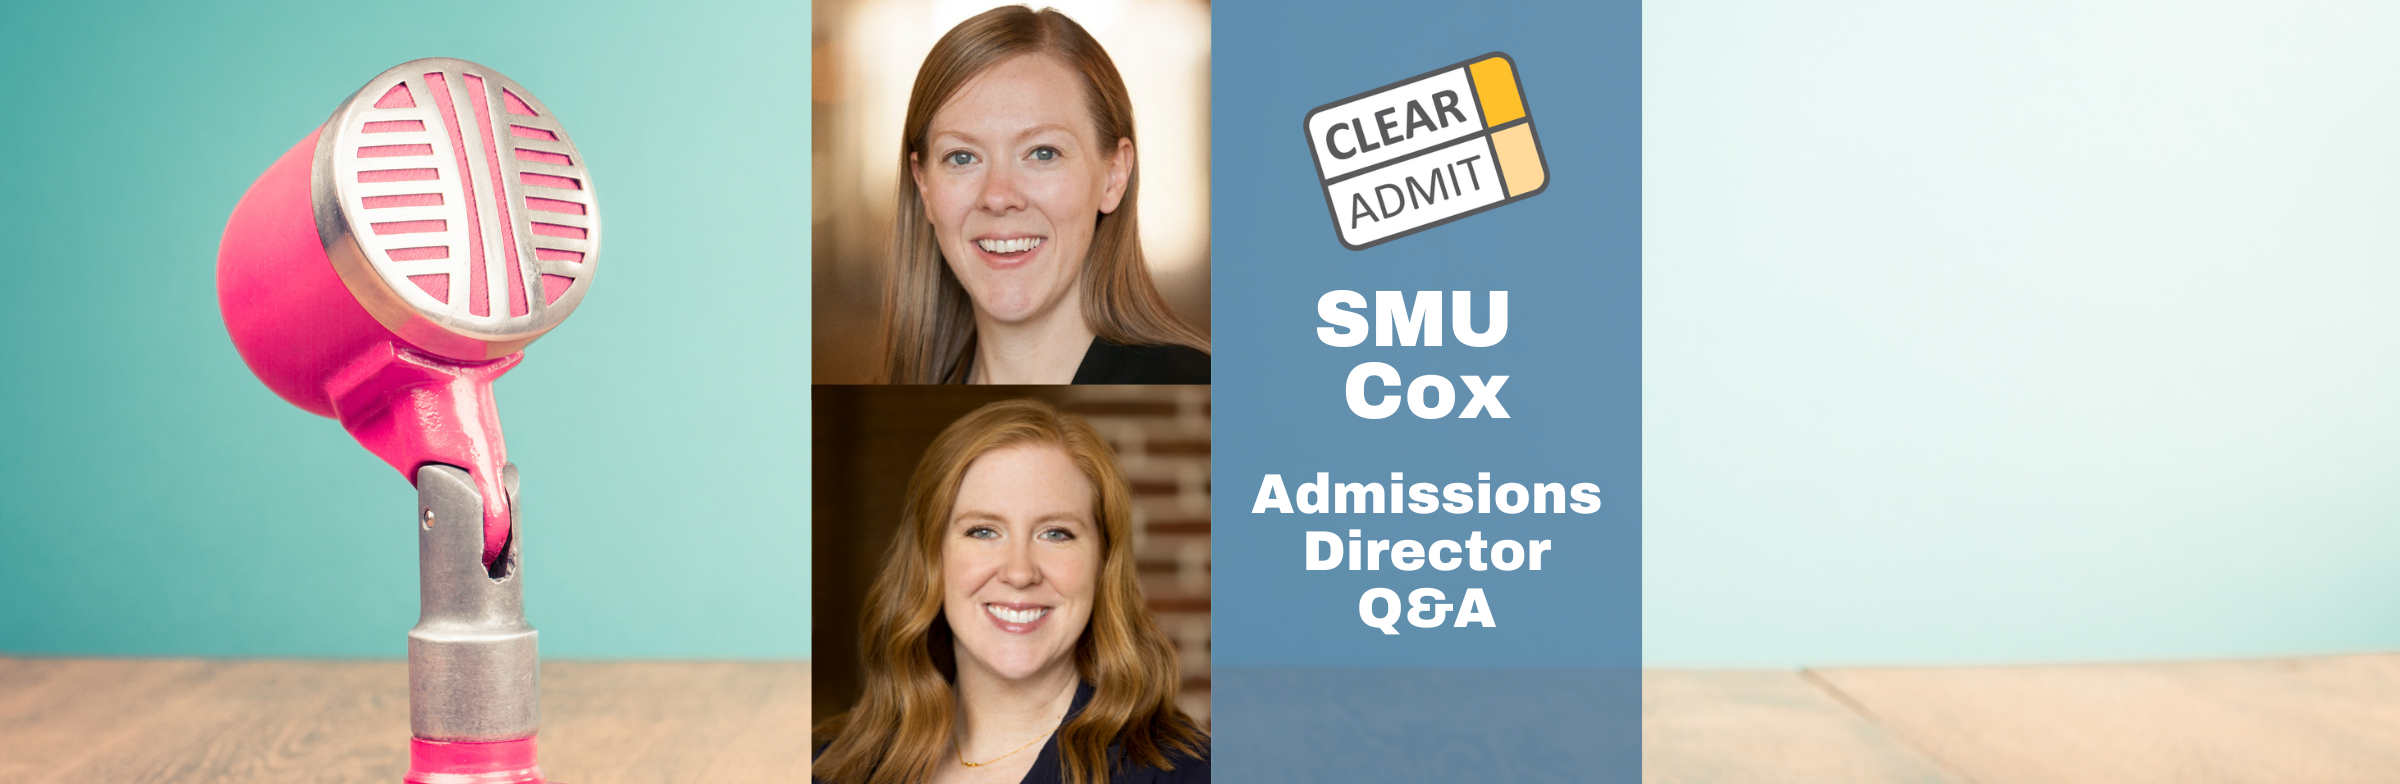 Image for Admissions Director Q&A: Gail Saegert & Jessica Lunce of SMU Cox